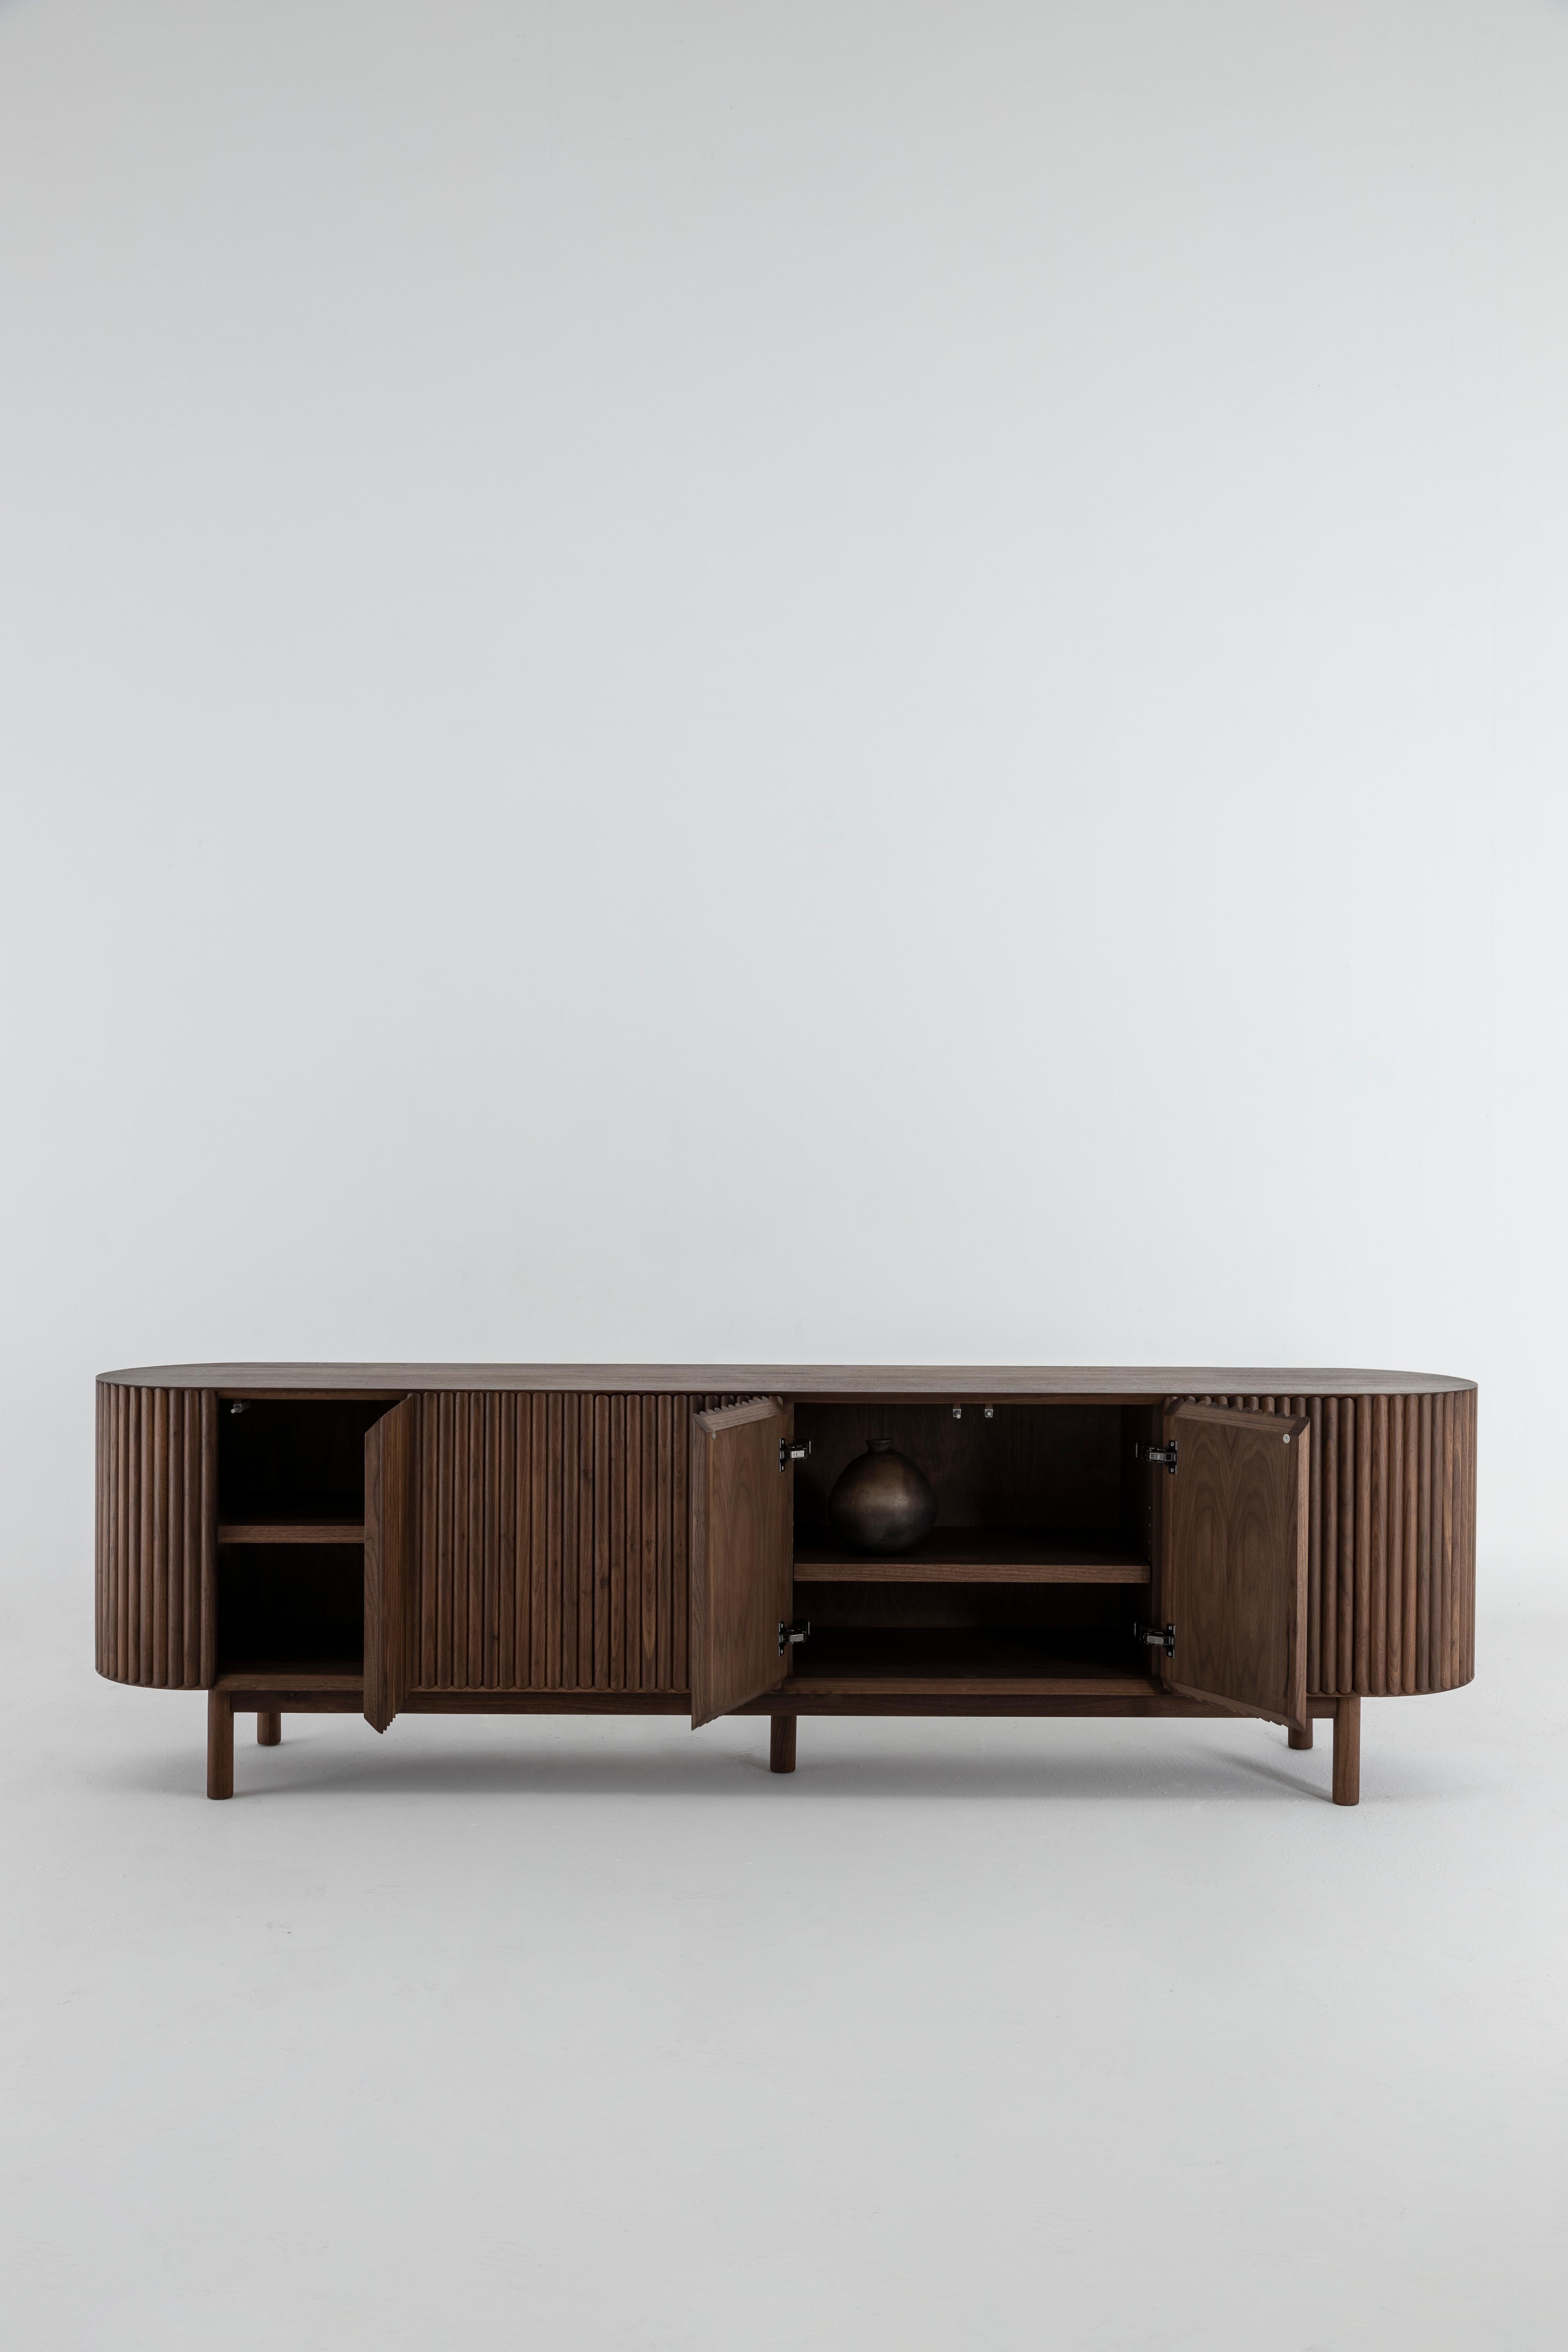 Between the sculpture and the functionality of the object, the RIMA credenza is inspired by the dynamism and the cadence of a poem, drawing all the attention to the wooden slats that are repeated one after the other to form a texture that embraces